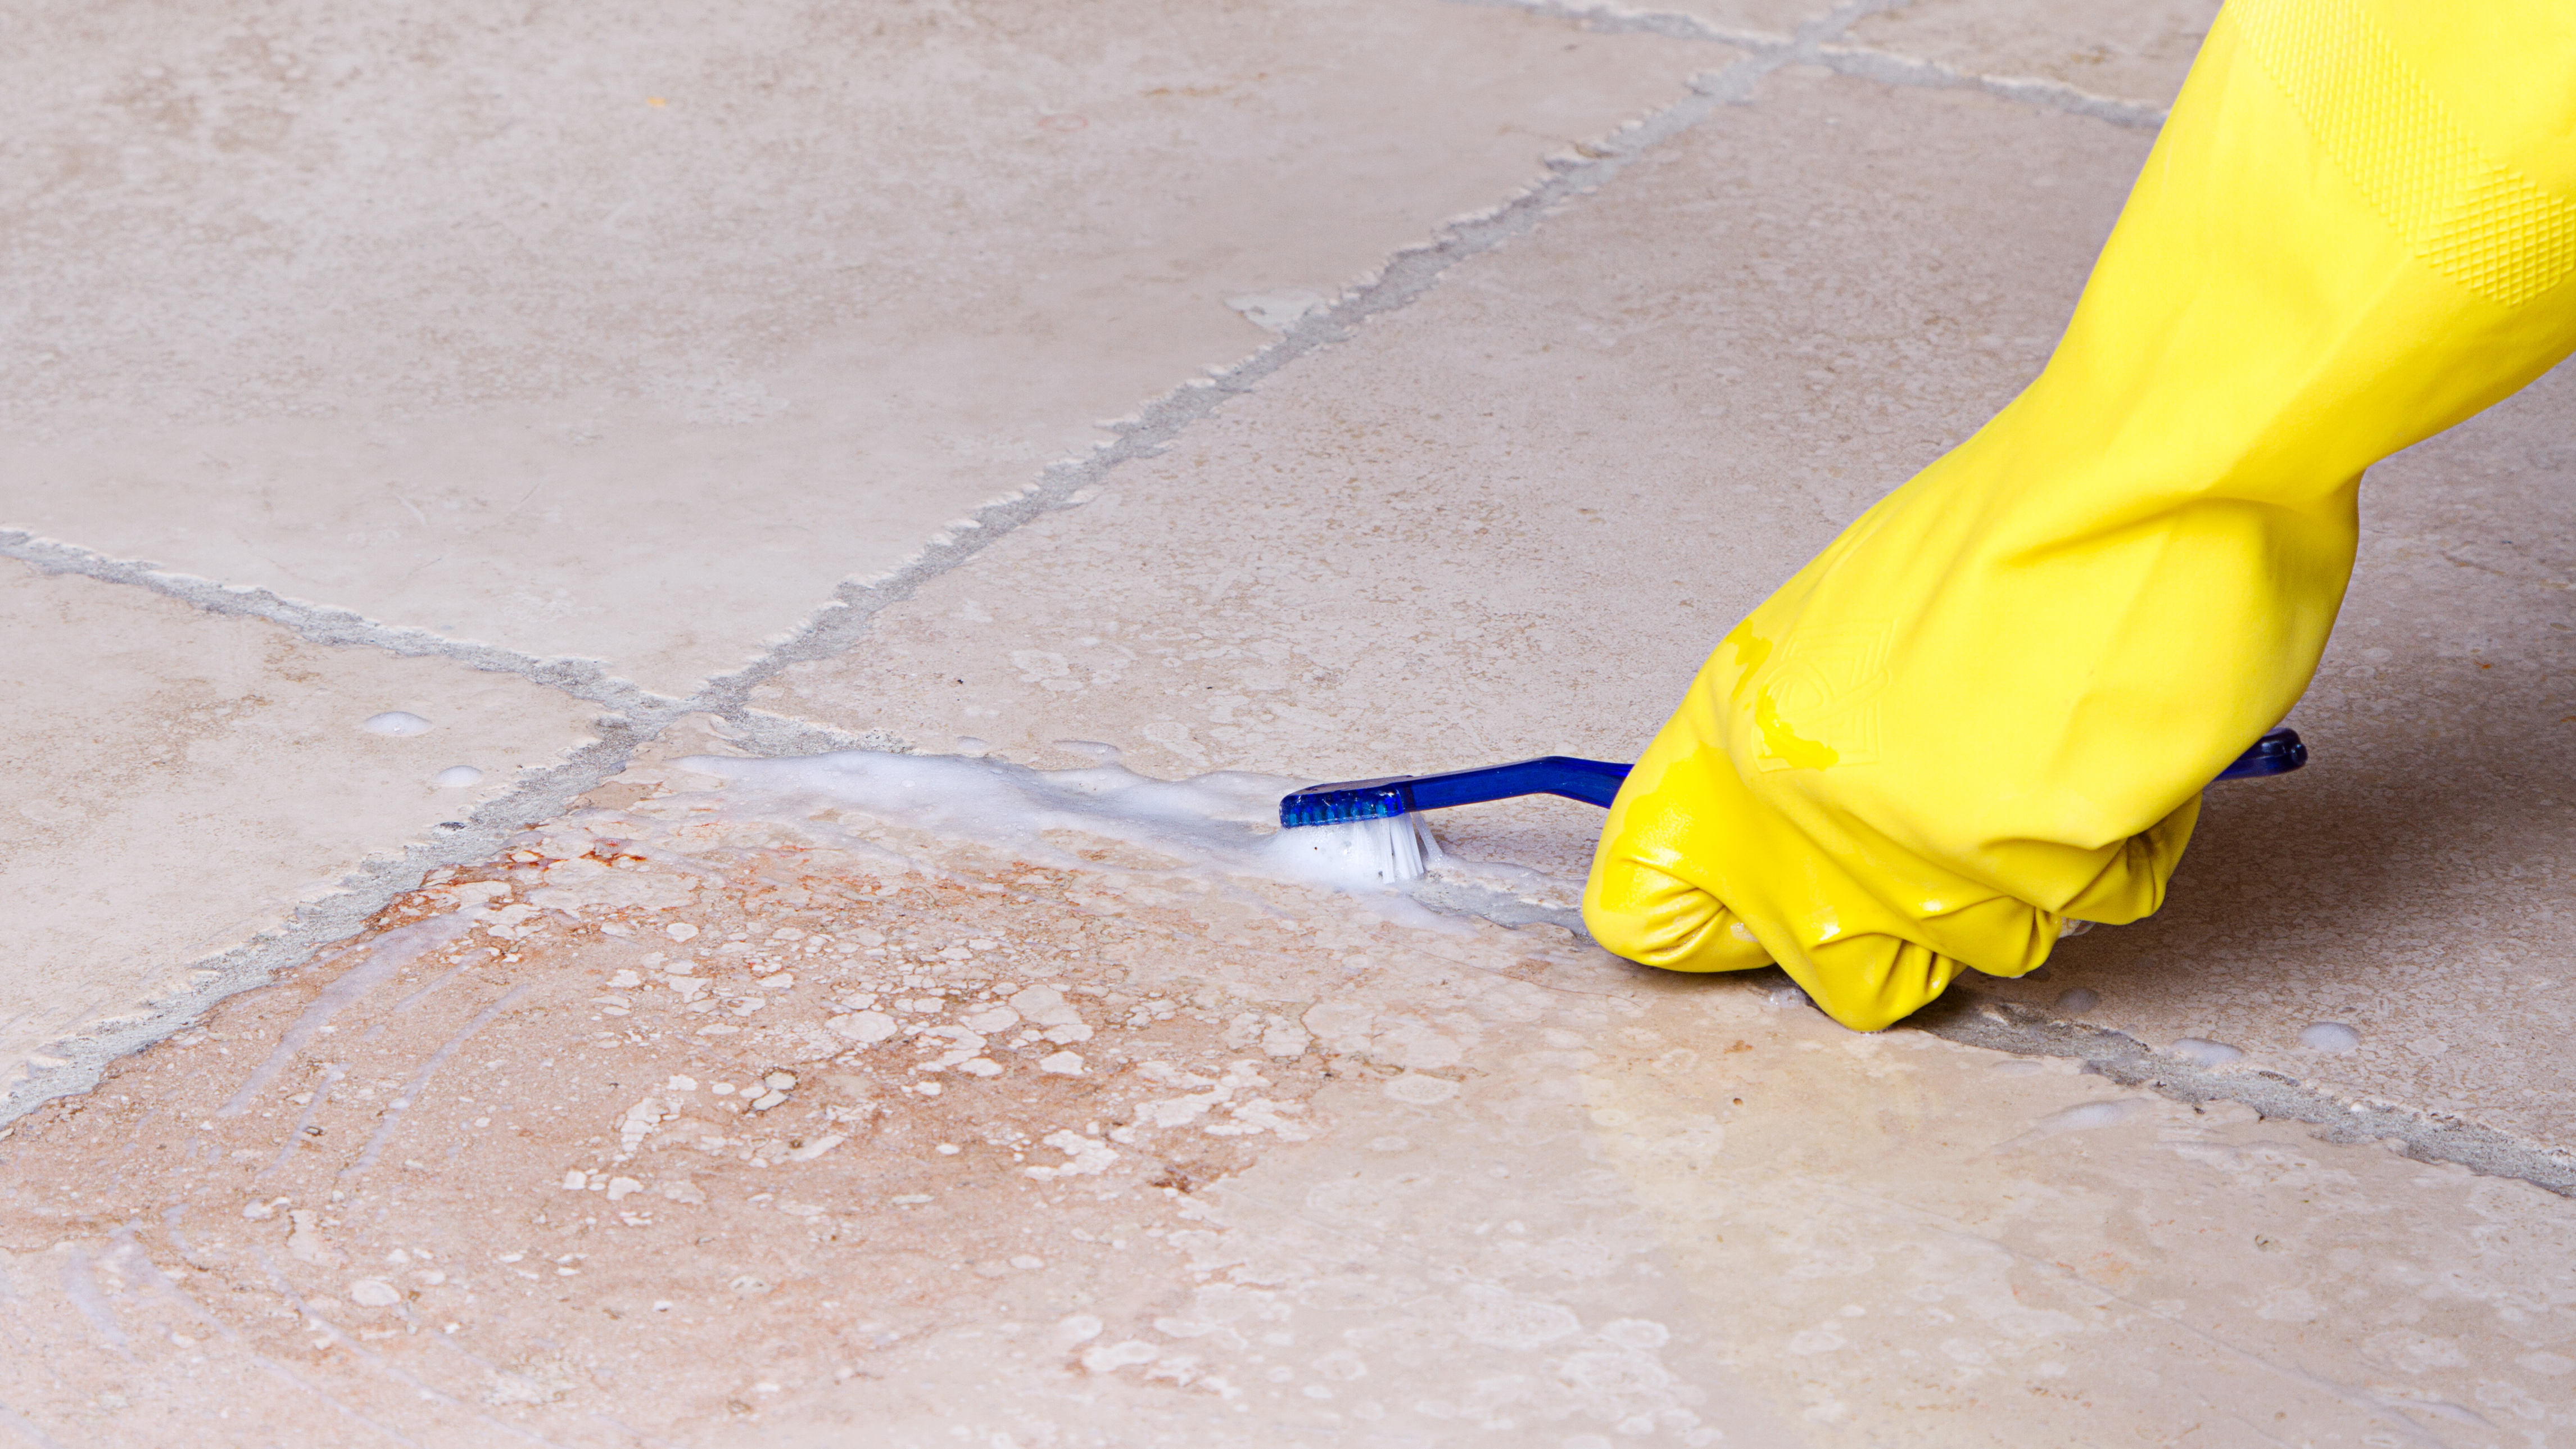 How To Clean Grout On Floor Tiles, How To Clean Floor Tile Grout With Baking Soda